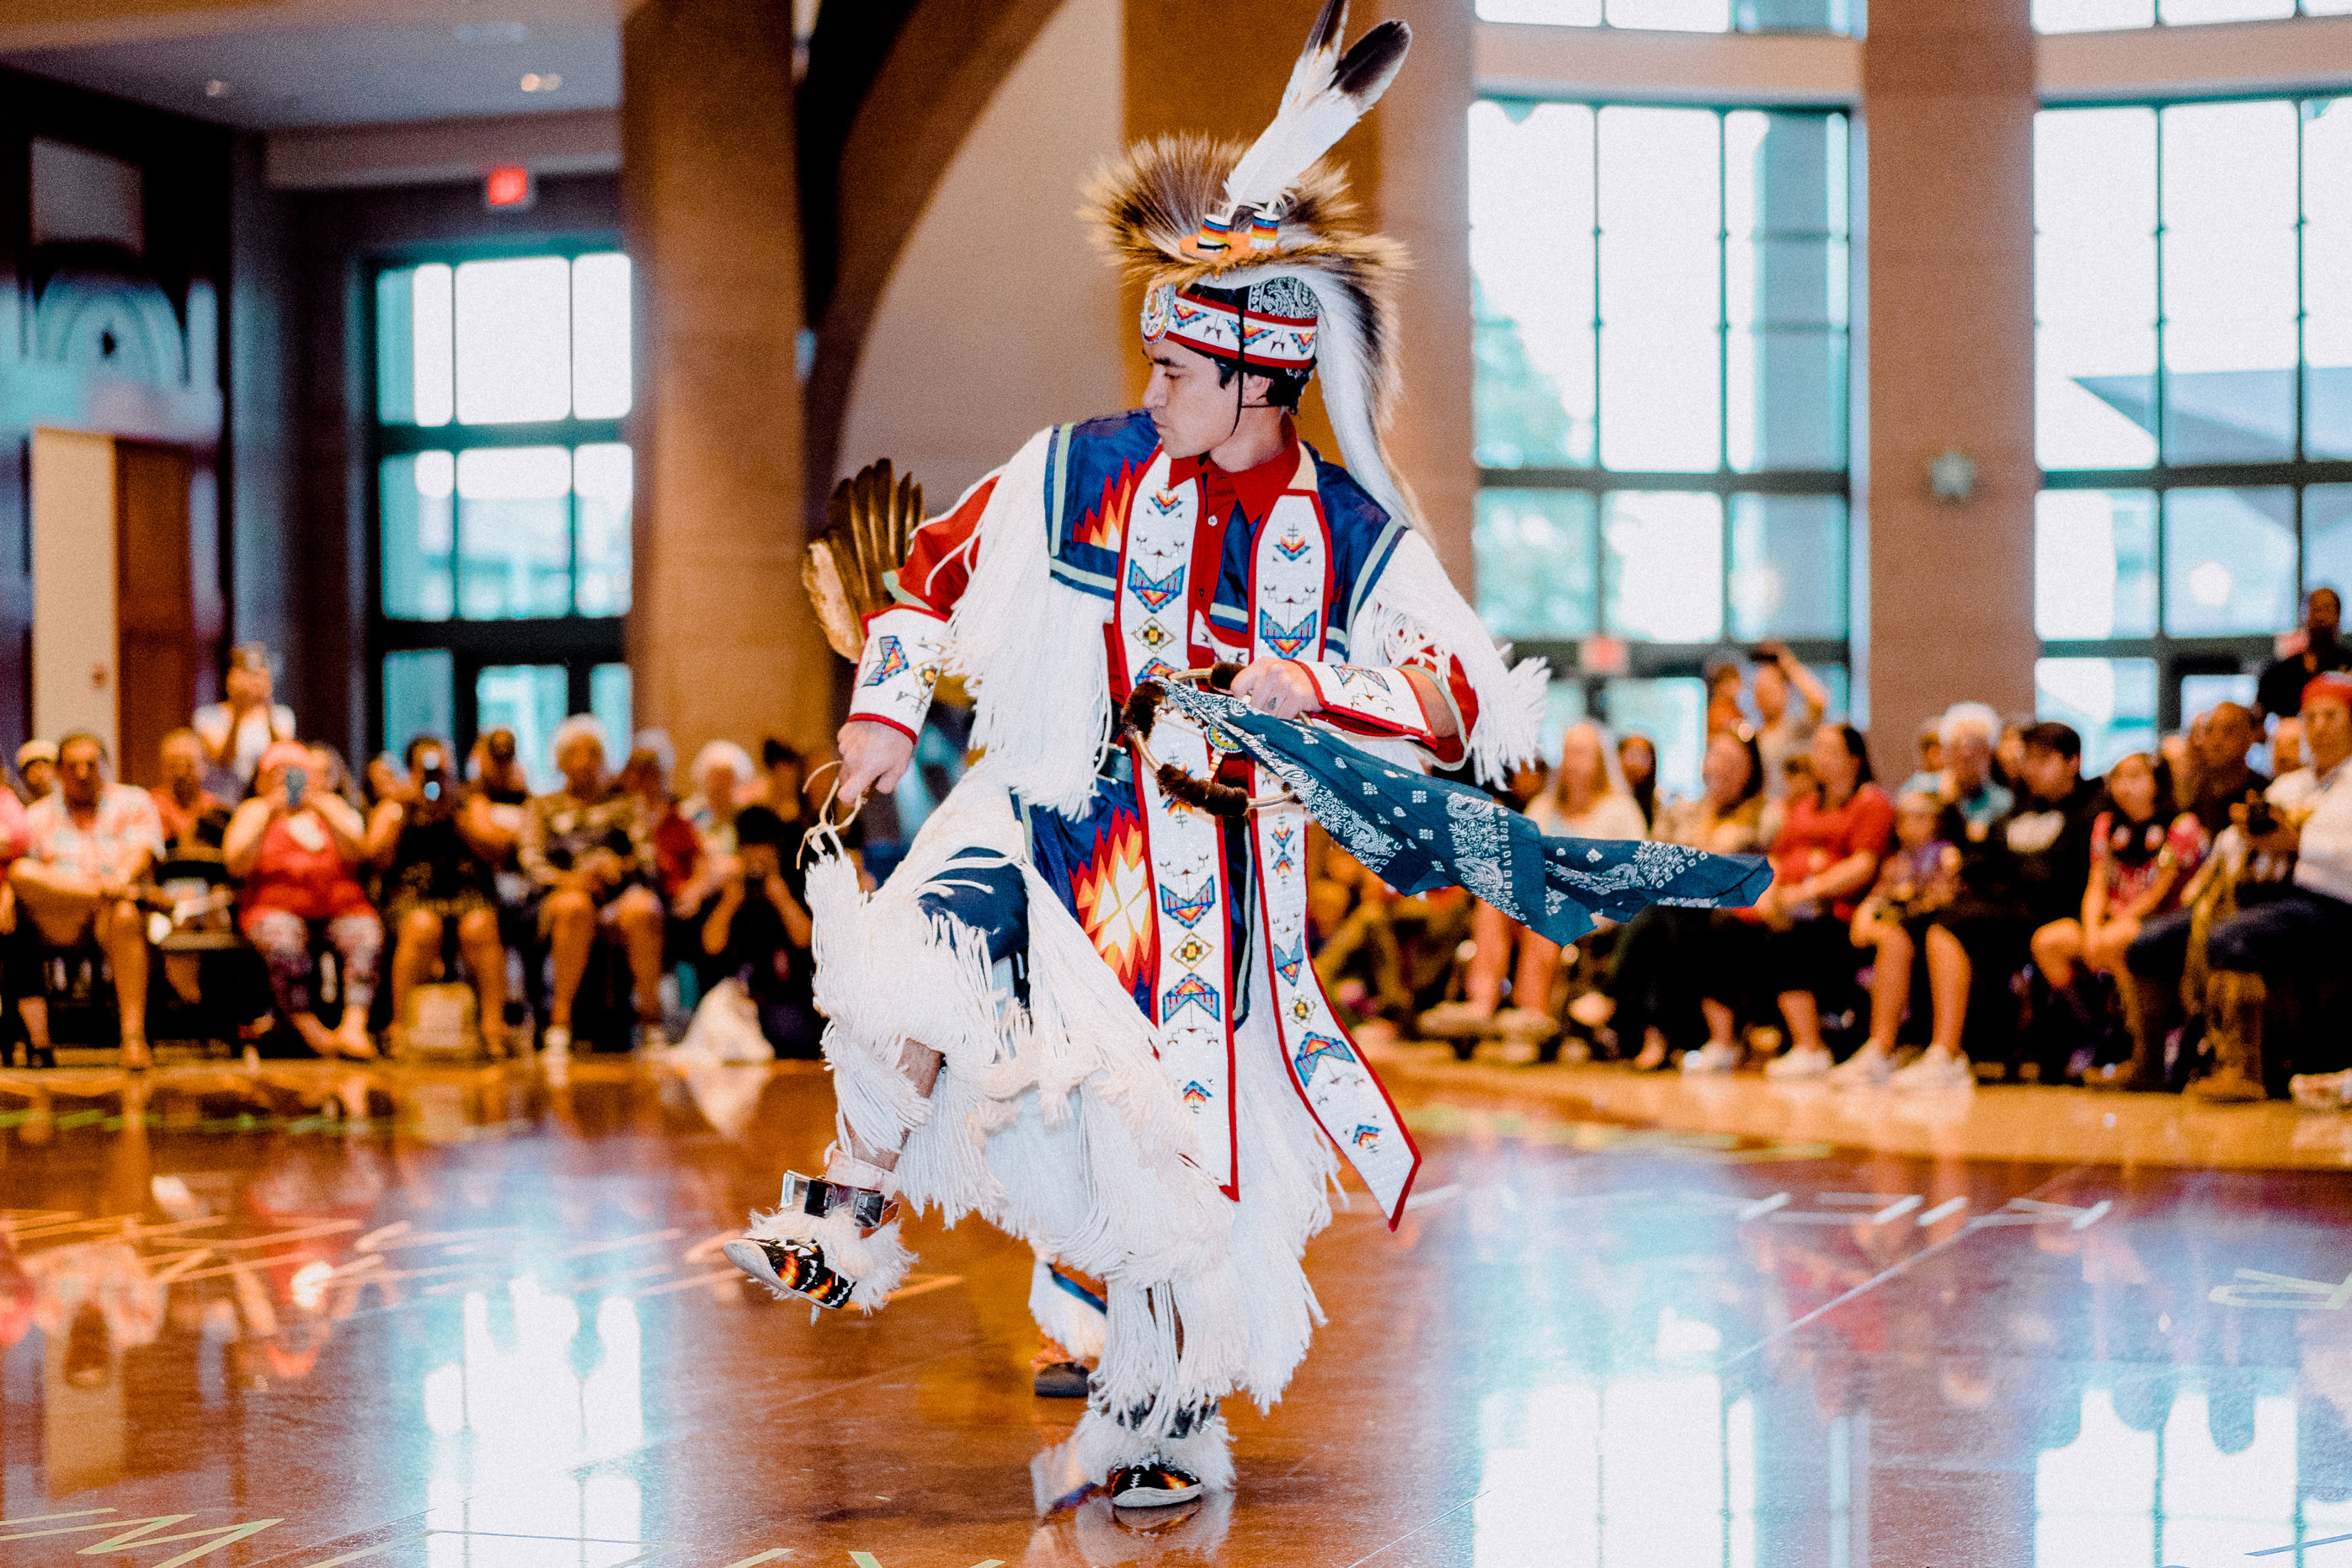 The Bullock Texas State History Museum, in partnership with Great Promise for American Indians, will host the 10th Annual American Indian Heritage Day celebration on Friday, September 30, 2022.